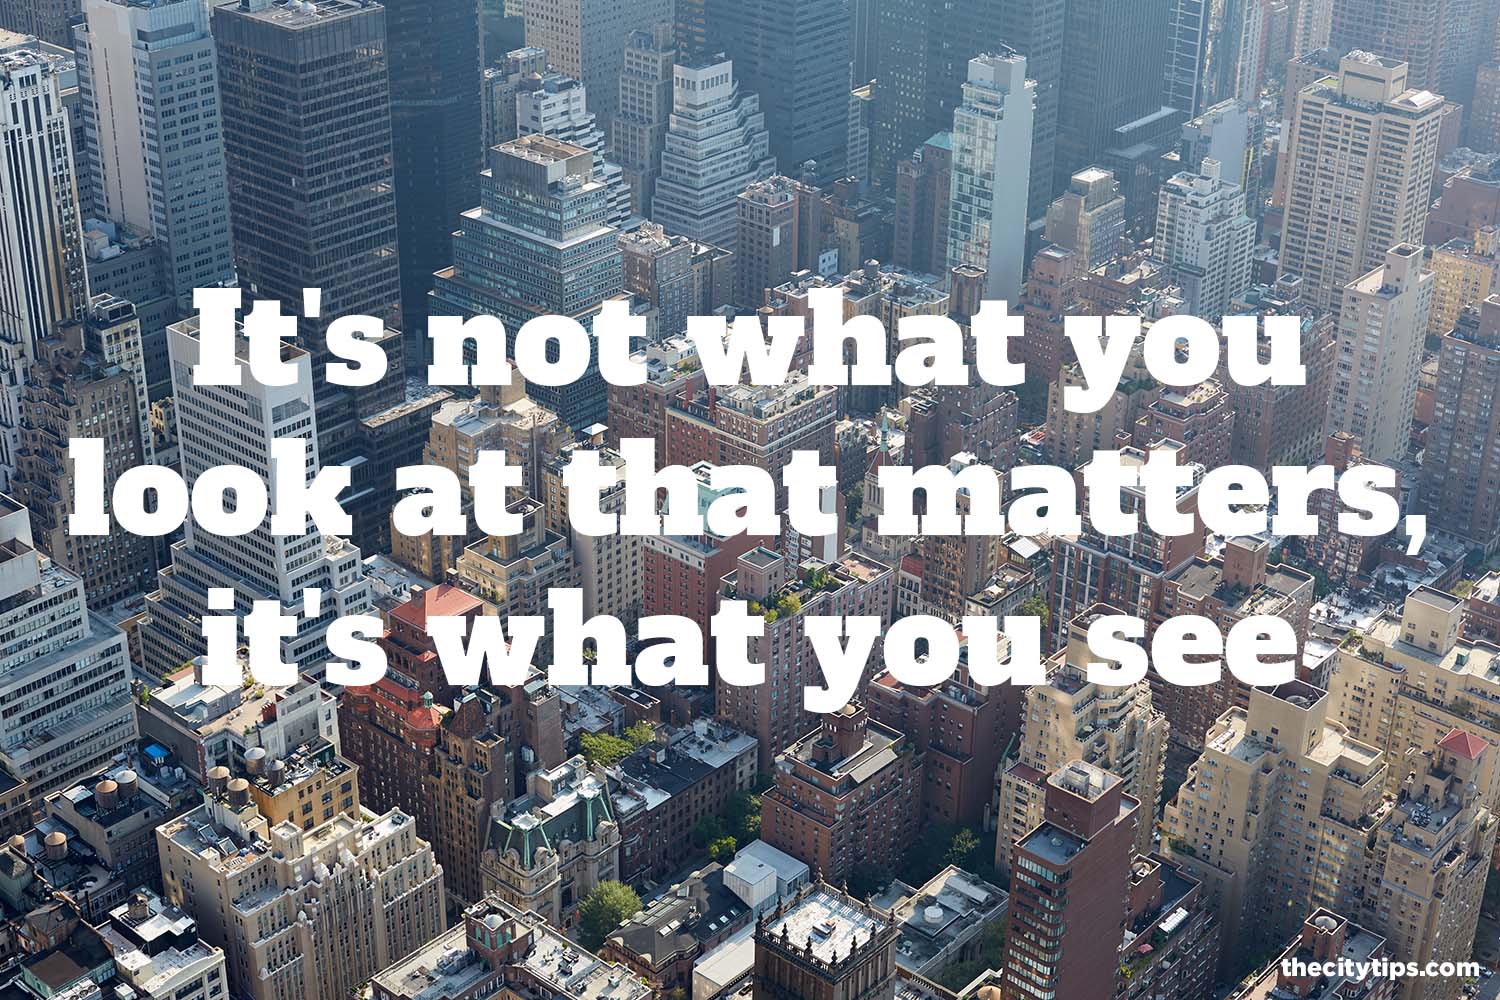 "It's not what you look at that matters, it's what you see." by Henry David Thoreau